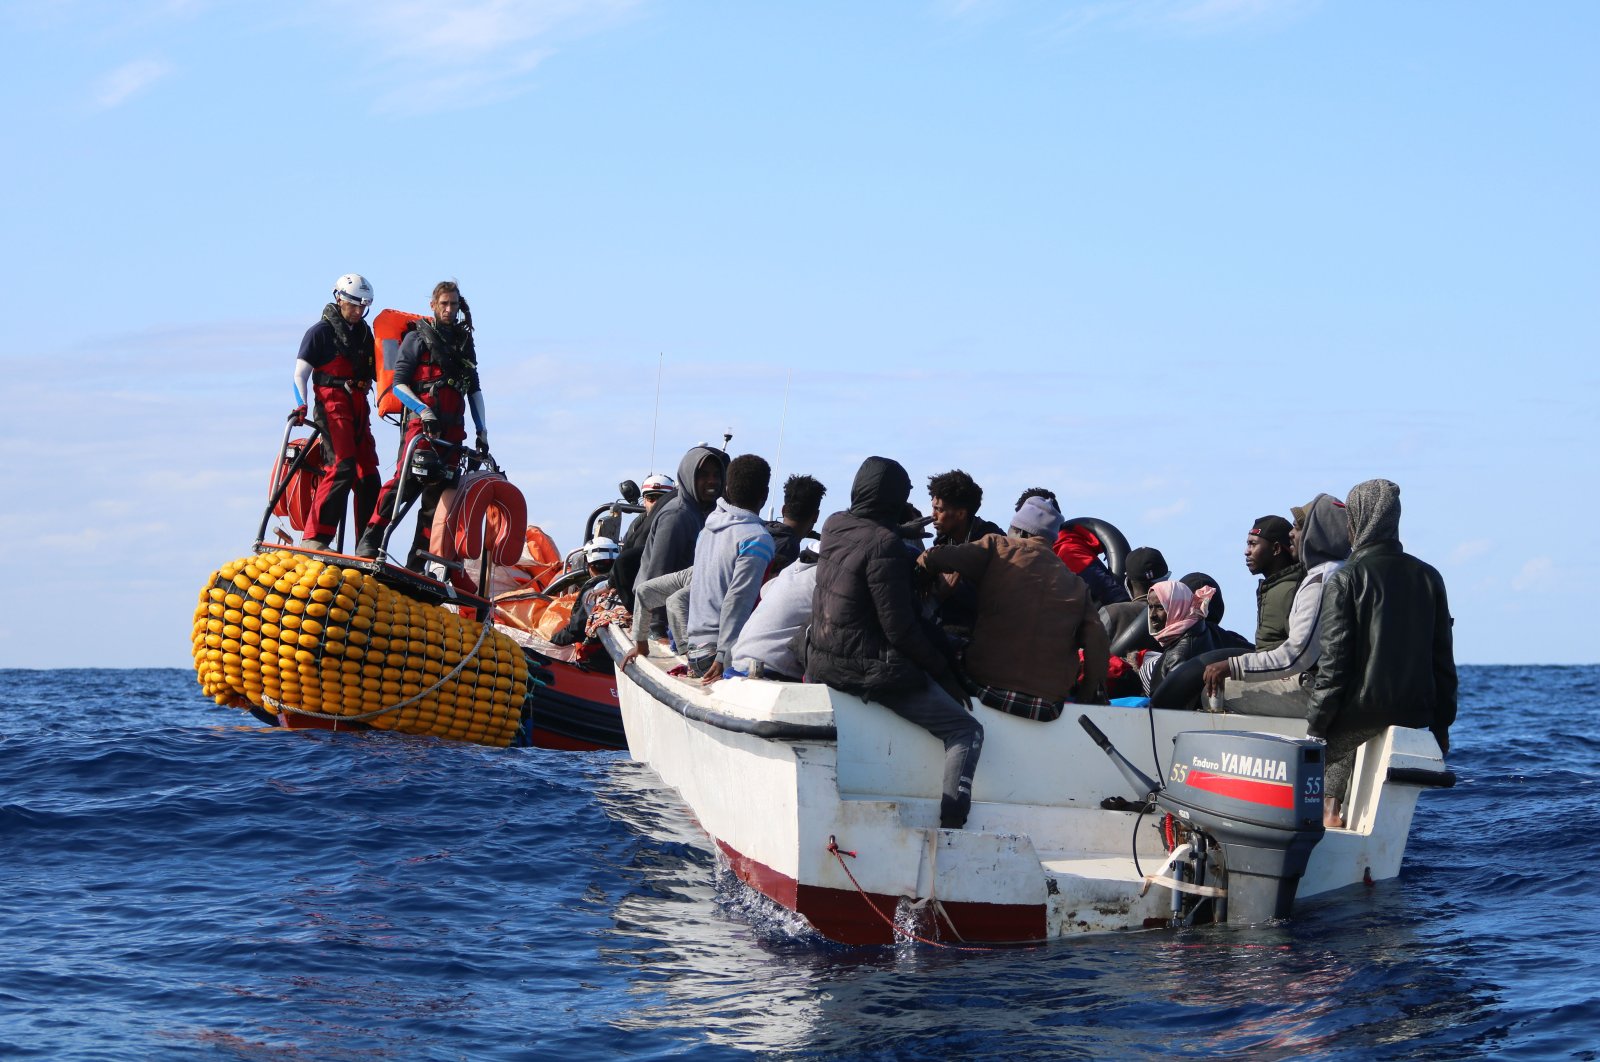 SOS Mediterranee team members from the humanitarian ship Ocean Viking approach a boat in distress with 30 people on board in the waters off Libya, Nov. 20, 2019. (AP Photo)